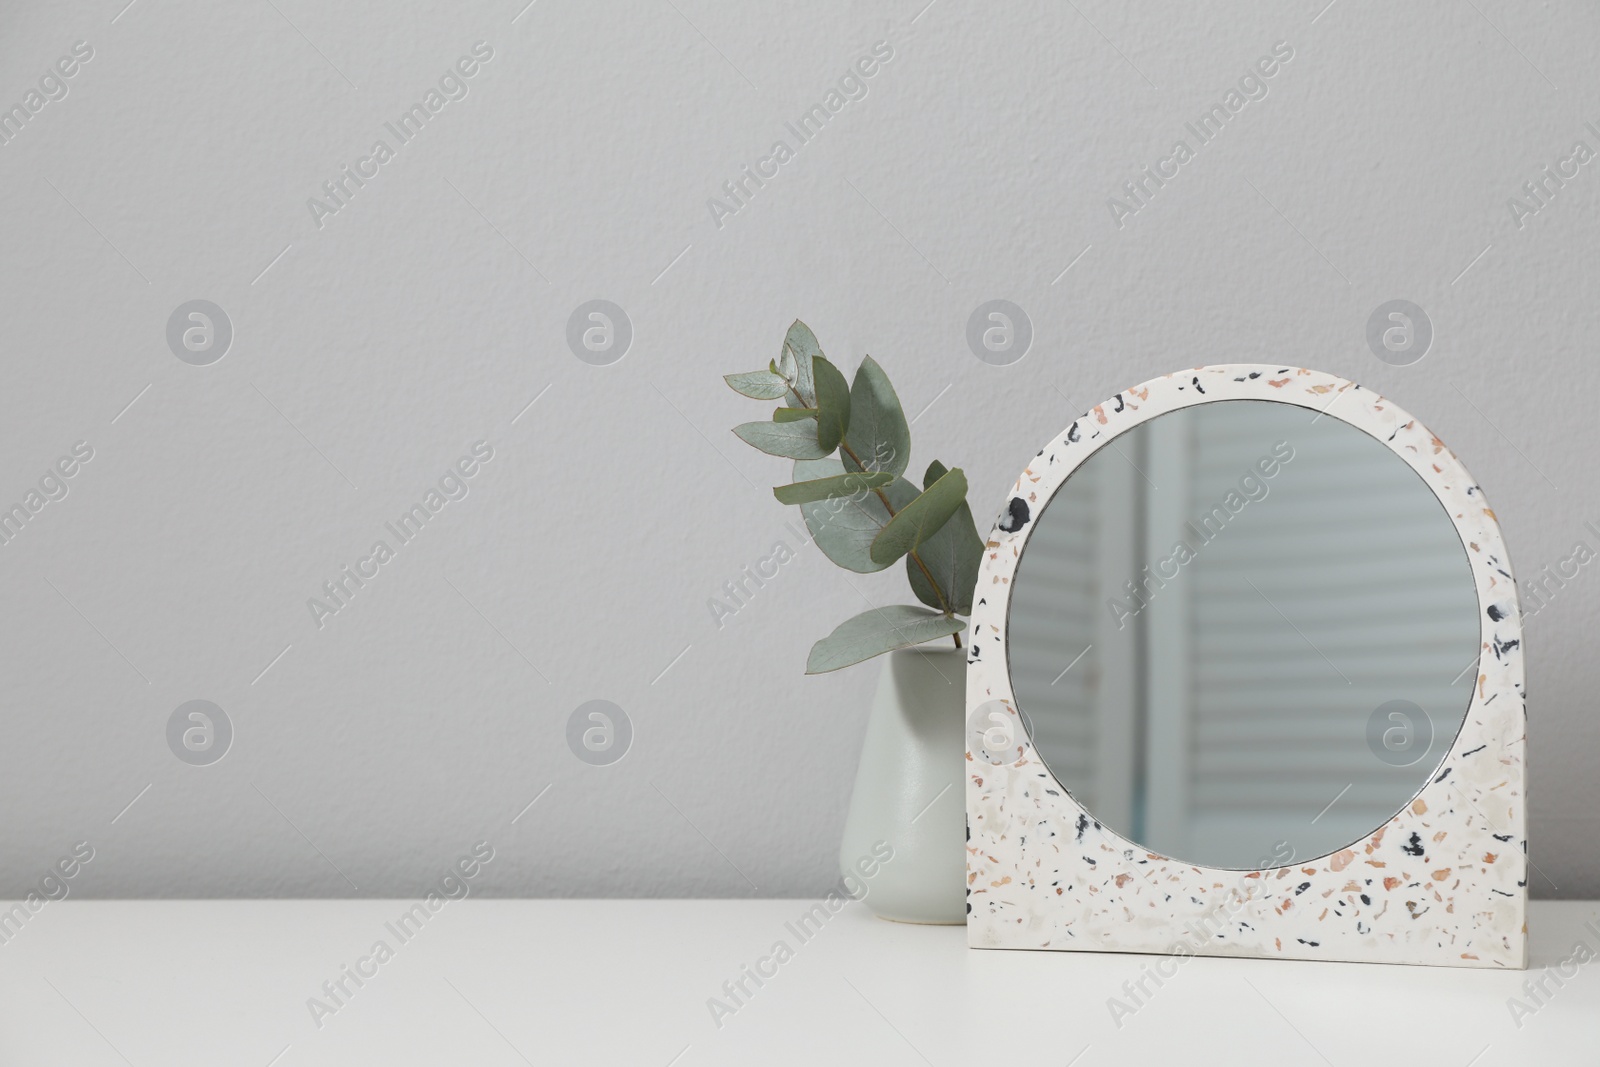 Photo of Stylish round mirror and eucalyptus branch on table near white wall, space for text